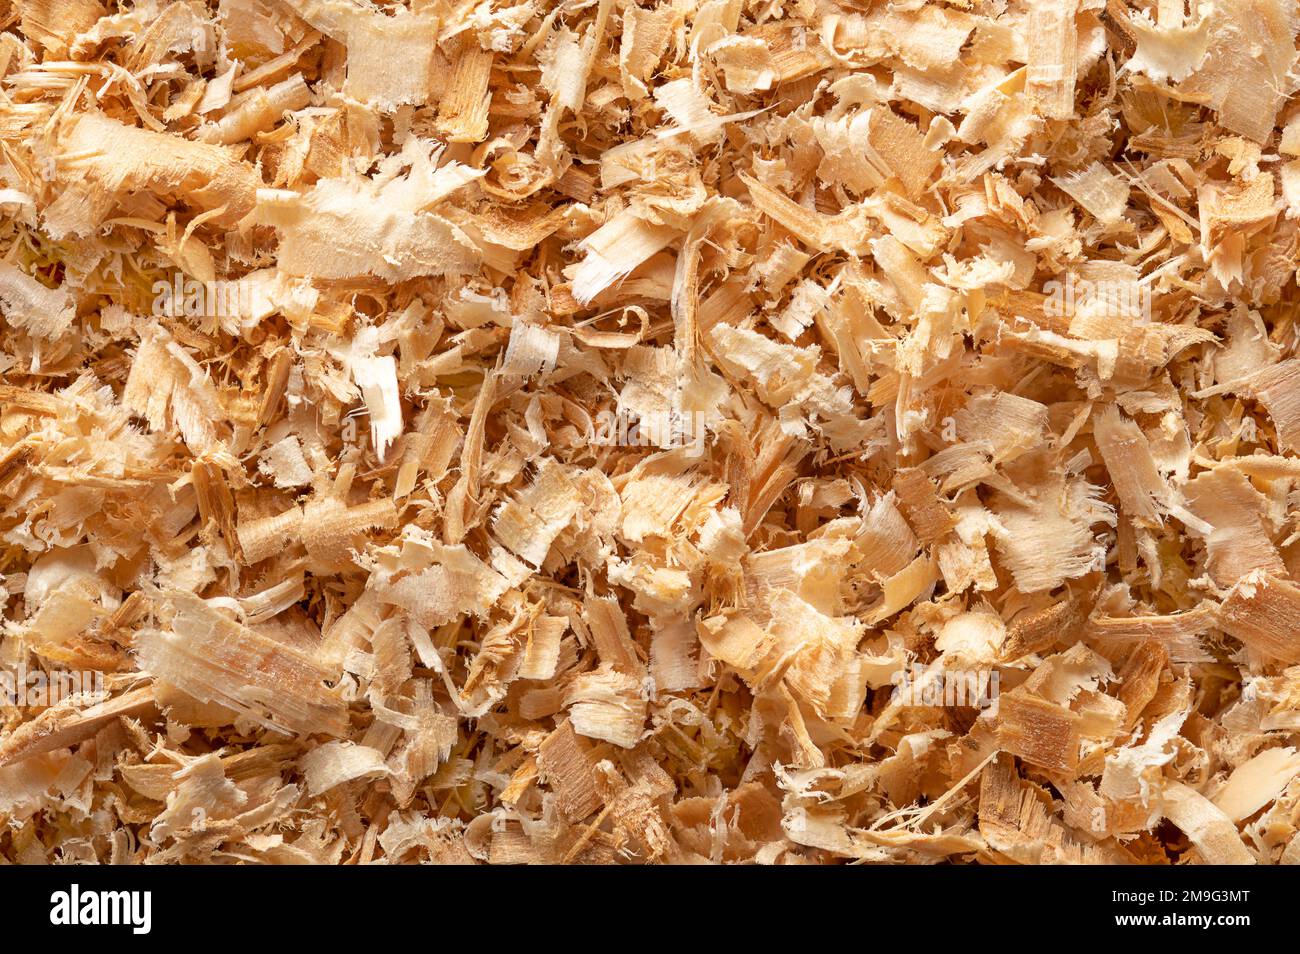 Wood chips, surface of small chippings of wood. Coarse sawdust, formed by sawing dried spruce. A by-product and waste product, mainly used as additive. Stock Photo